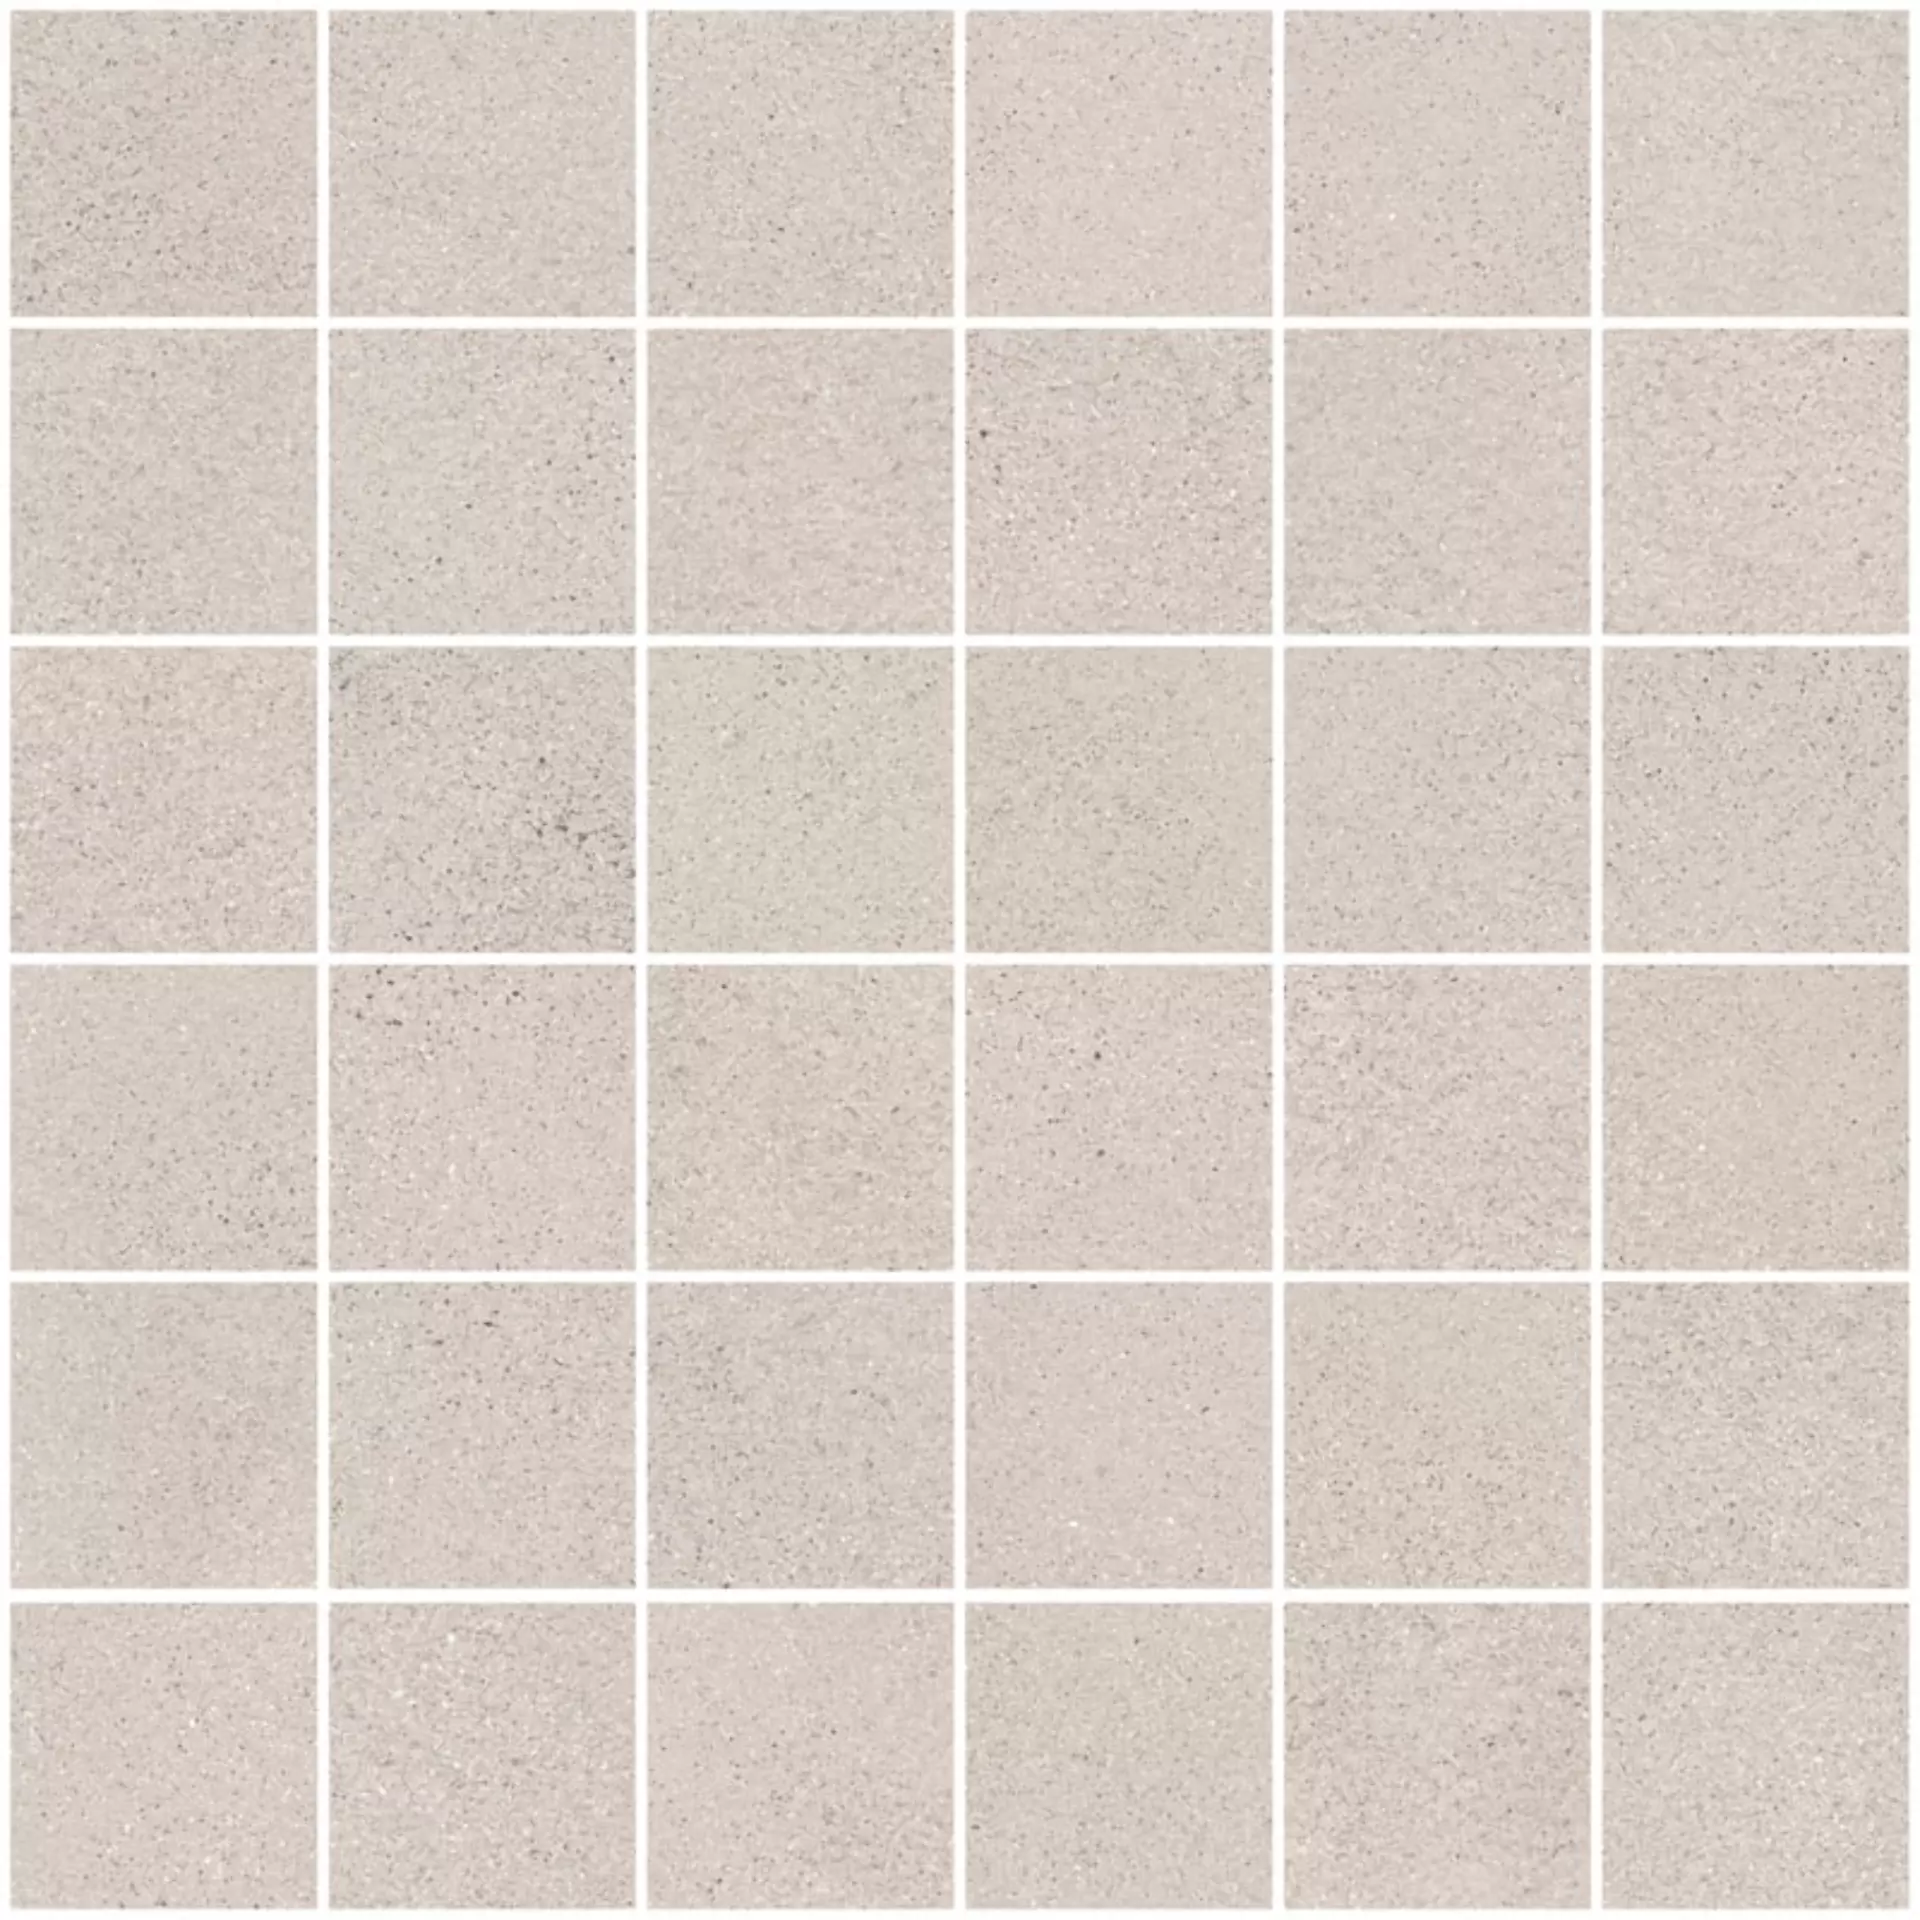 Sant Agostino Sable Cement Natural Mosaic CSAMSACE30 30x30cm rectified 10mm